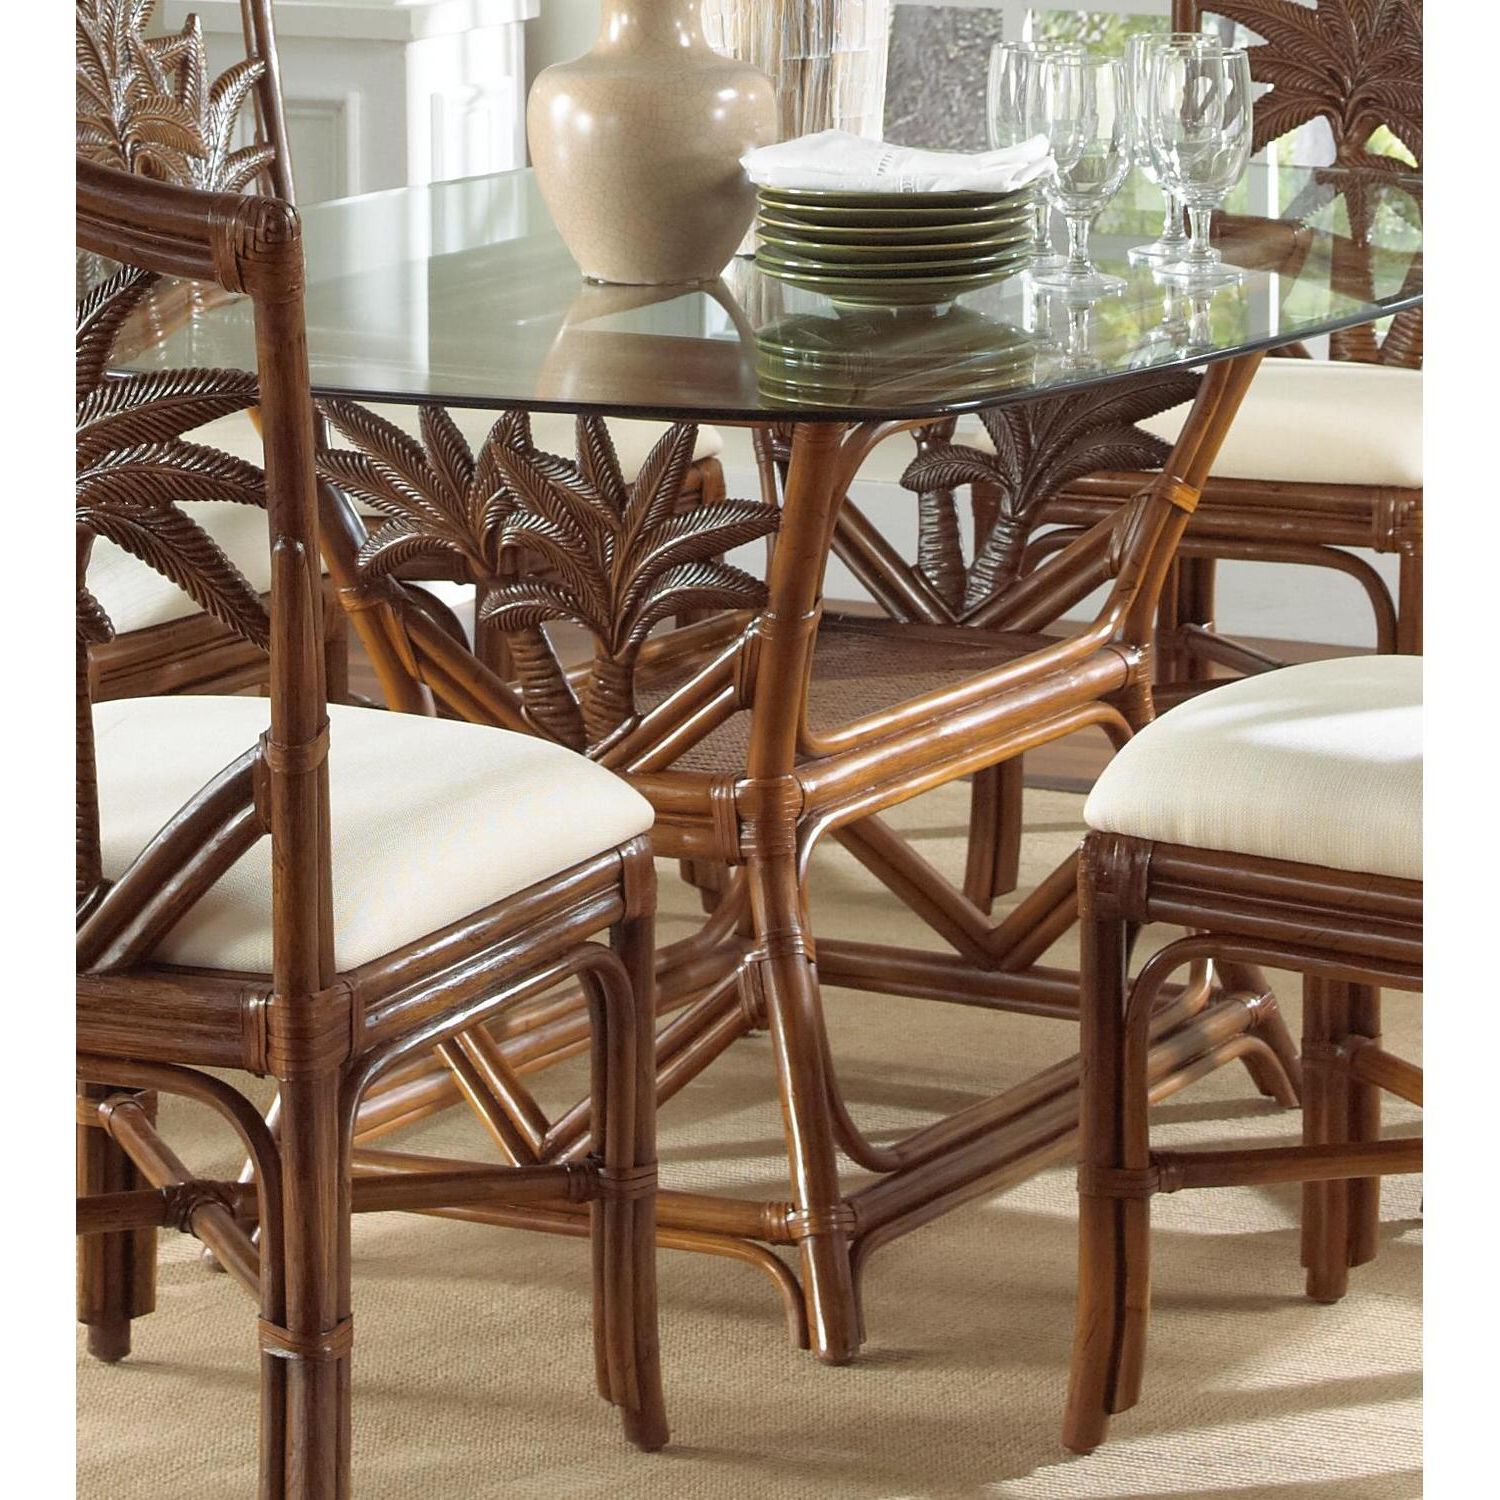 Widely Used Distressed Wicker Patio Dining Set Intended For Rattan Dining Room Chairs – Californian Bungalow Interior Design (View 12 of 15)